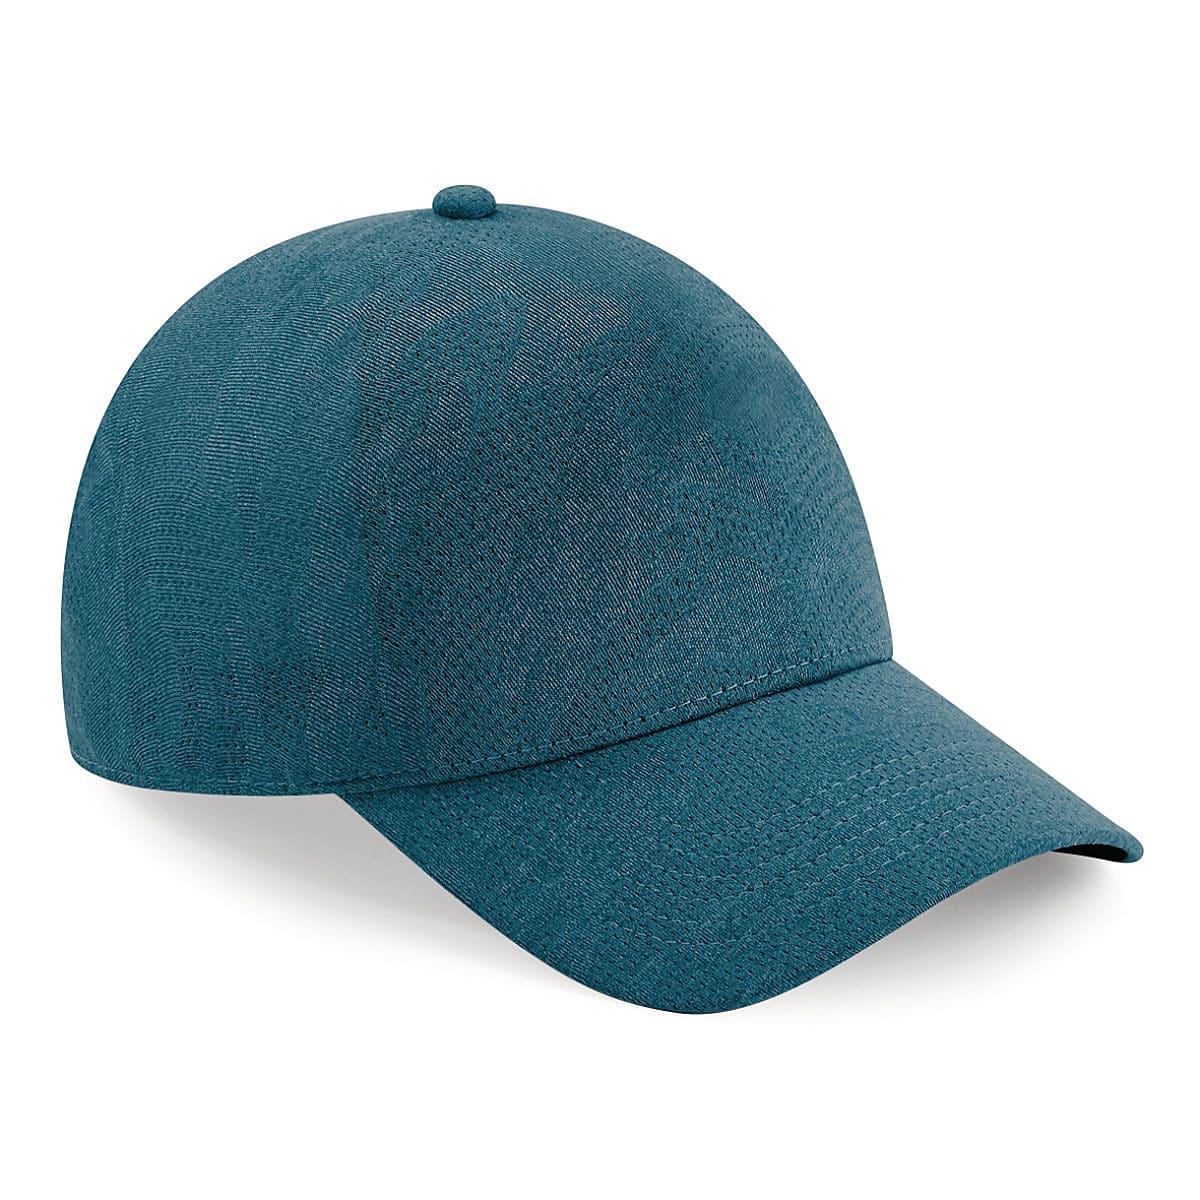 Beechfield Seamless Performance Cap in Heather Coral (Product Code: B558)